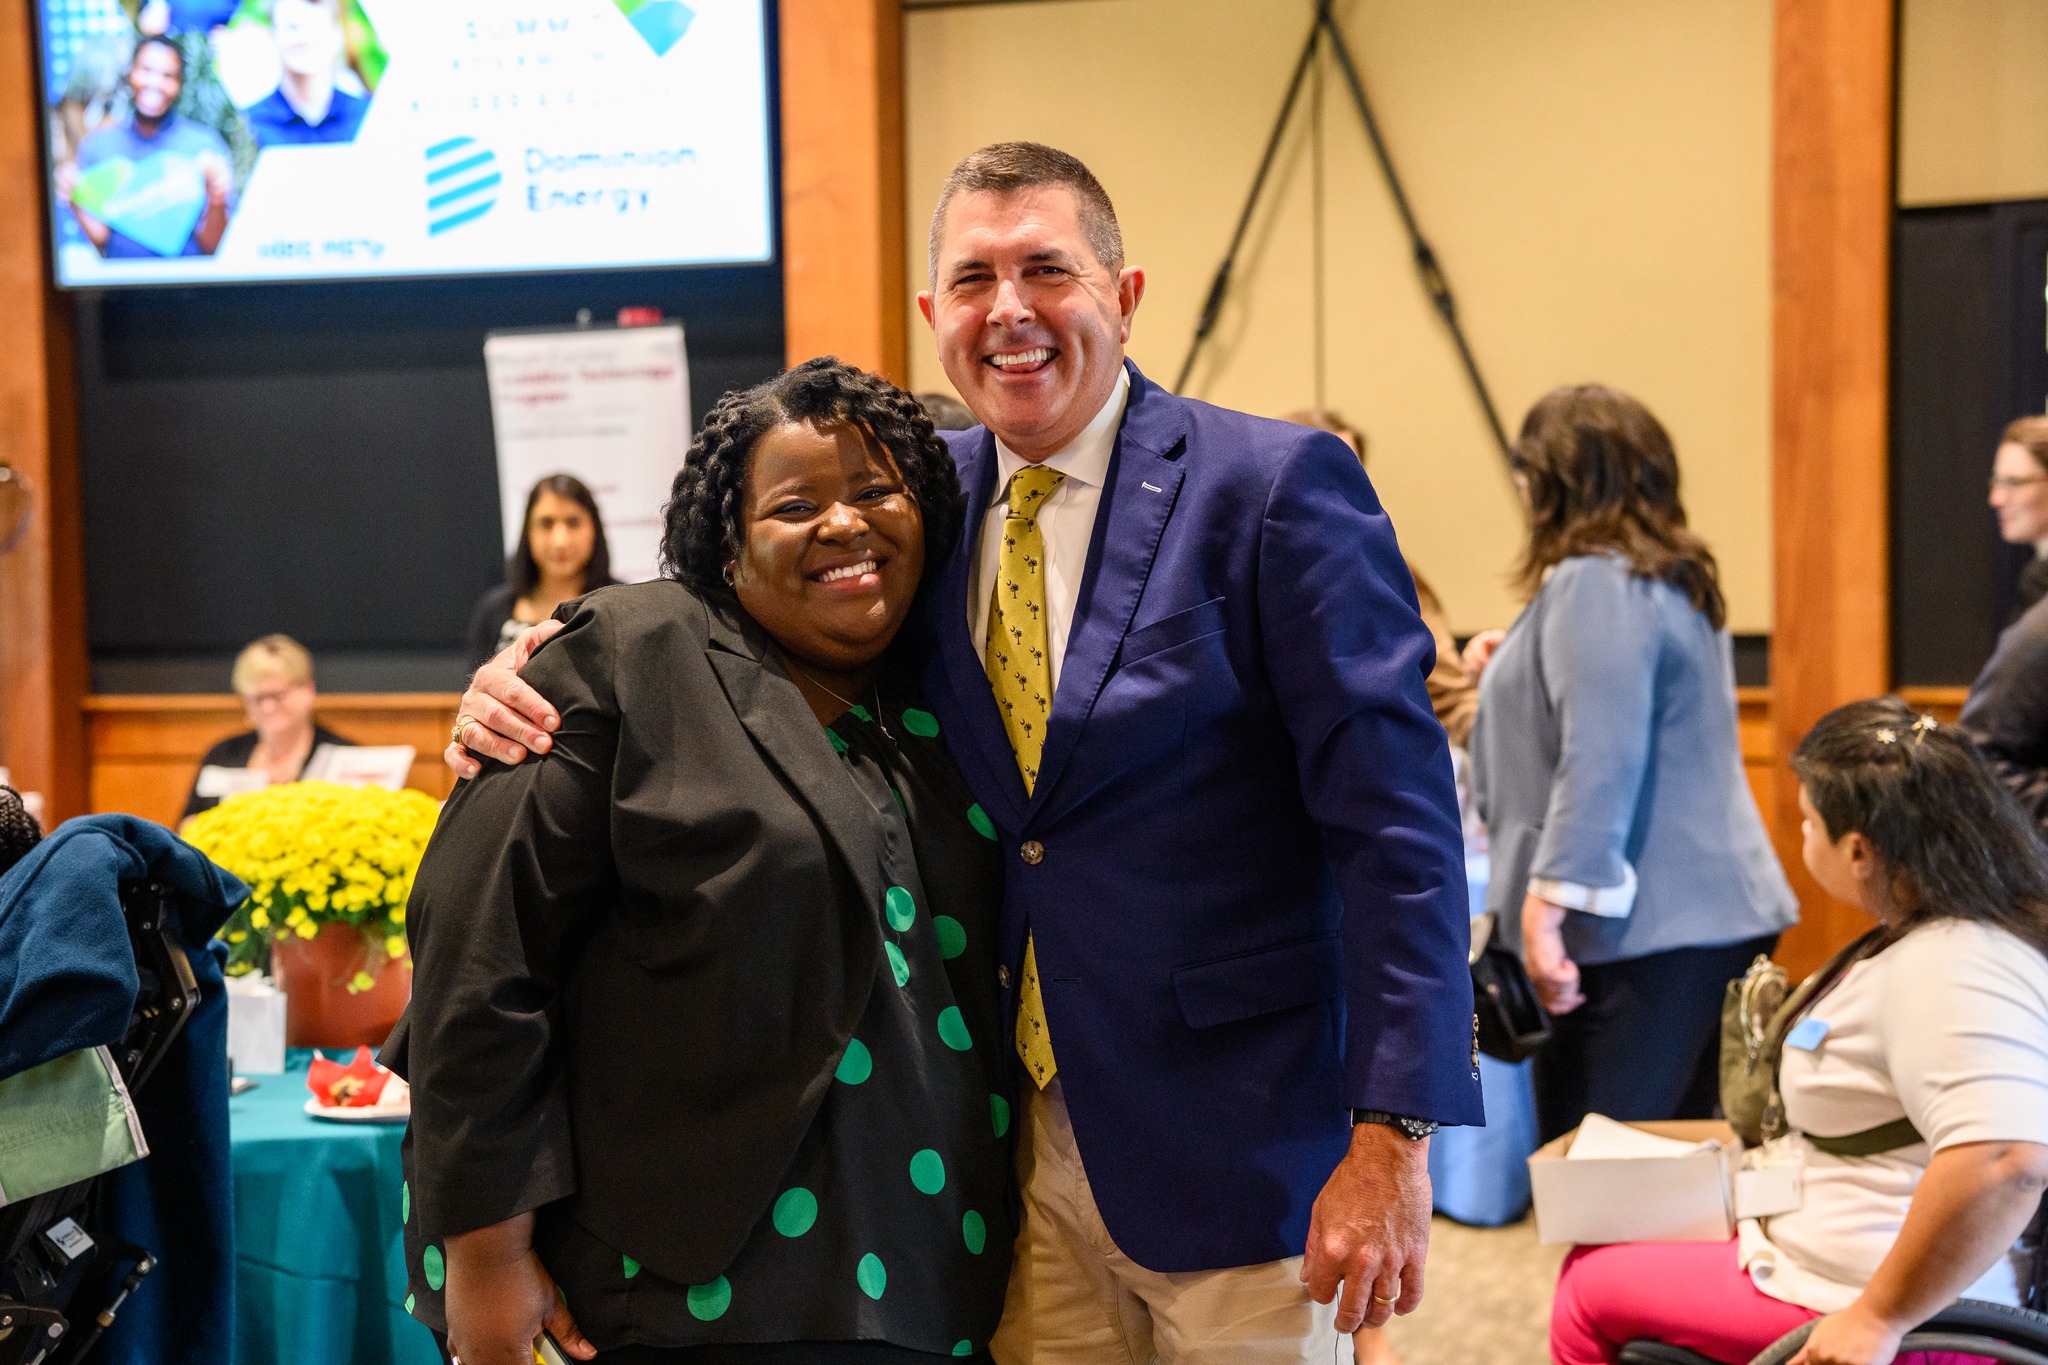 Event Keynote speaker, Keller Kissam, Dominion Energy President. He is a white man wearing a blazer. He stands side hugging an event participant, a Black woman wearing a black blazer. They both are smiling.